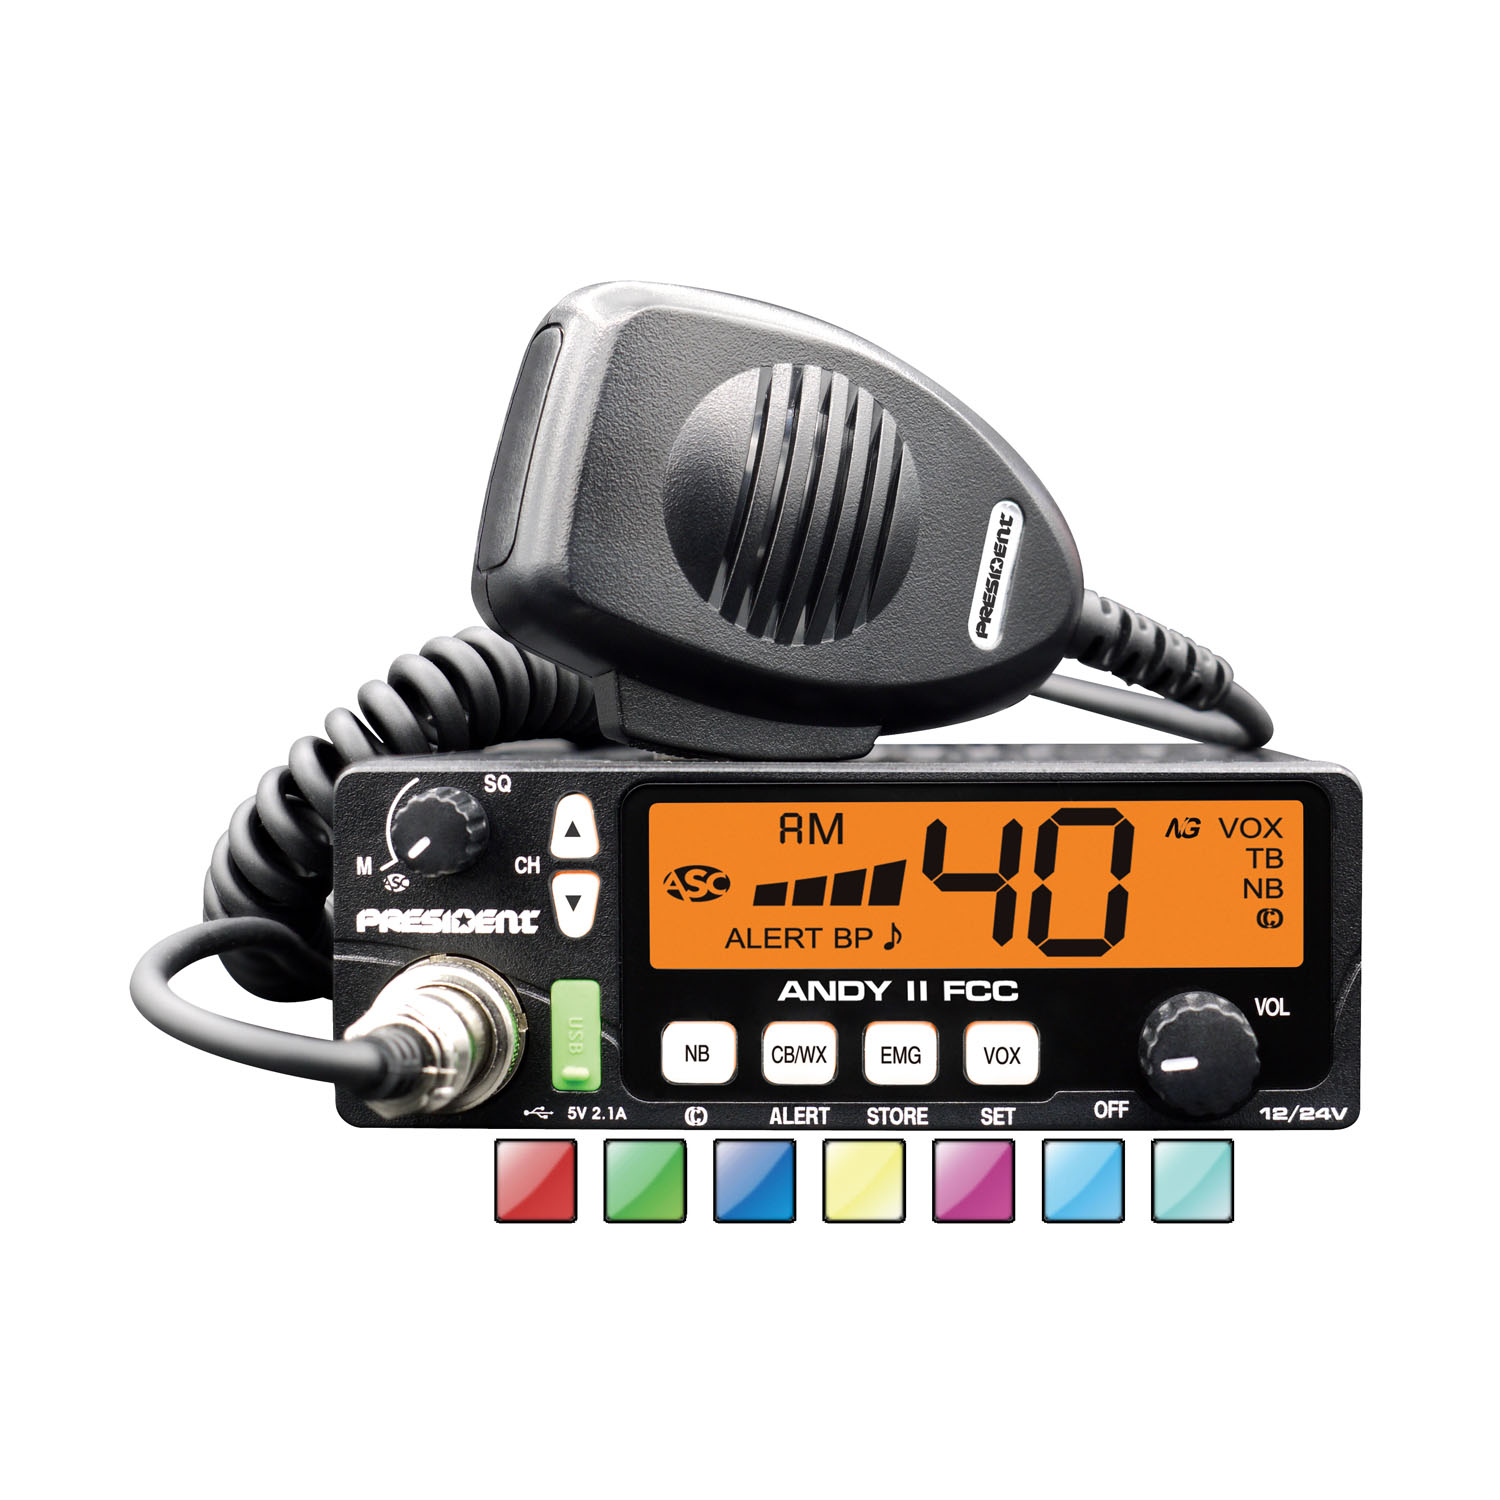 PRESIDENT - ANDY II FCC 12-24 VDC 40 CHANNEL CB RADIO WITH USB PORT, 7 COLOR DISPLAY, VOX, WEATHER & ALERT